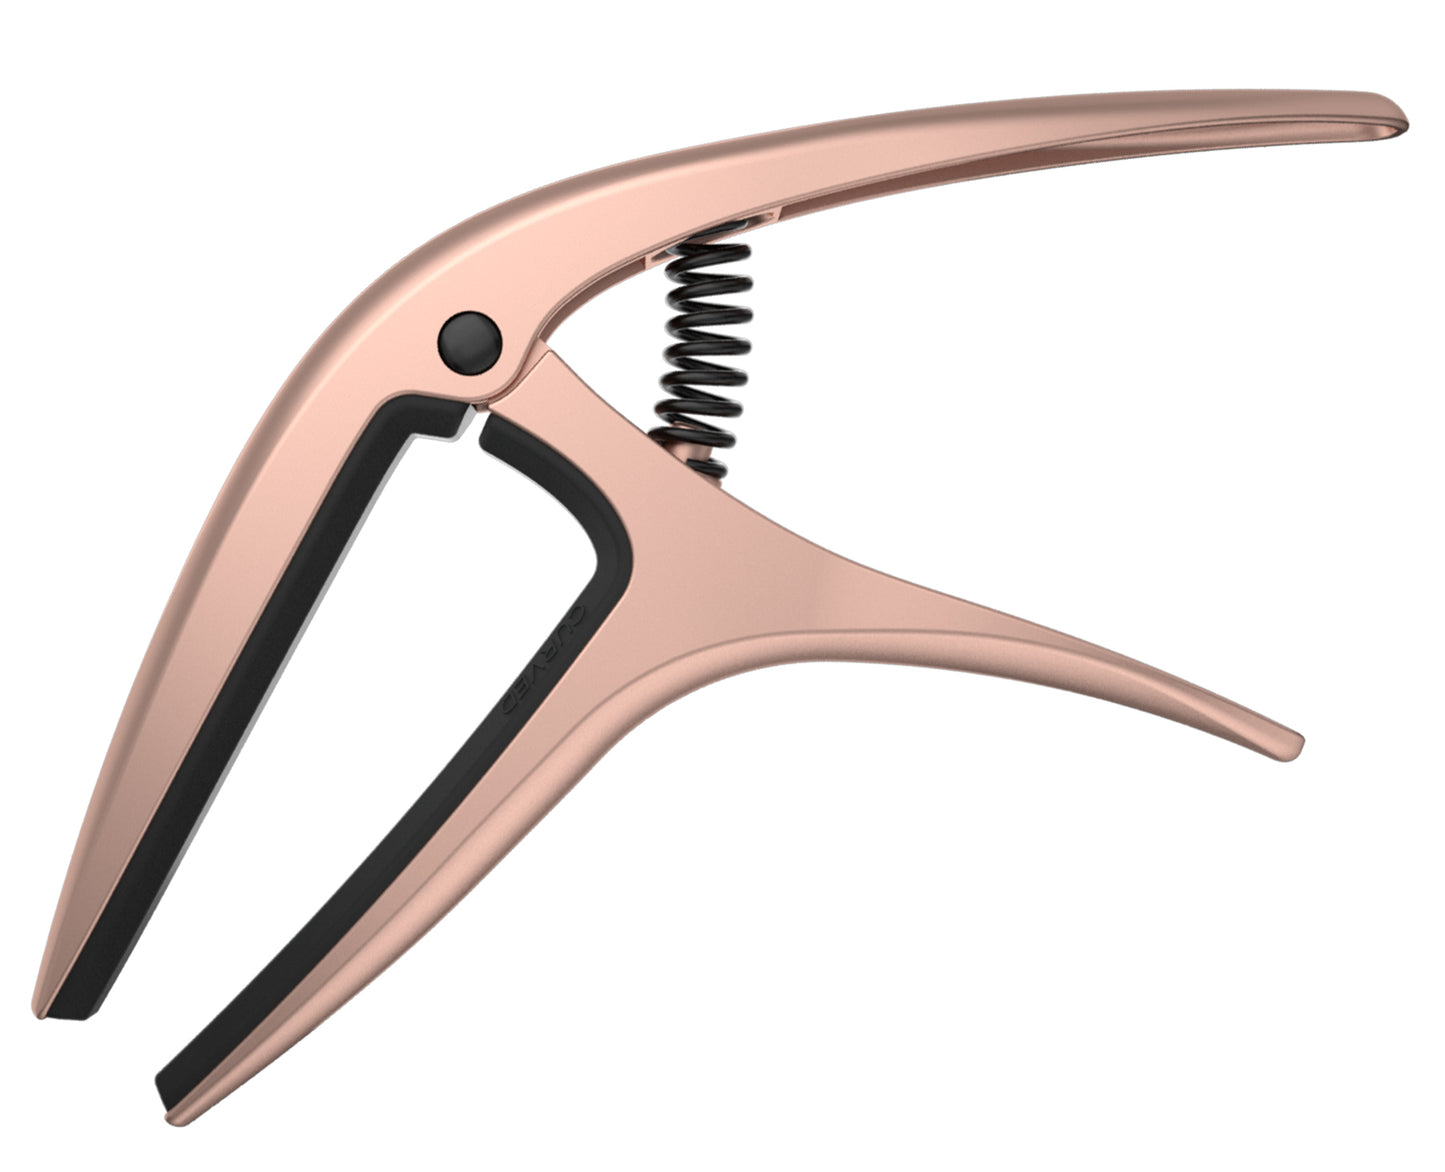 Capo - Electric and Acoustic - Rose Gold (satin finish)